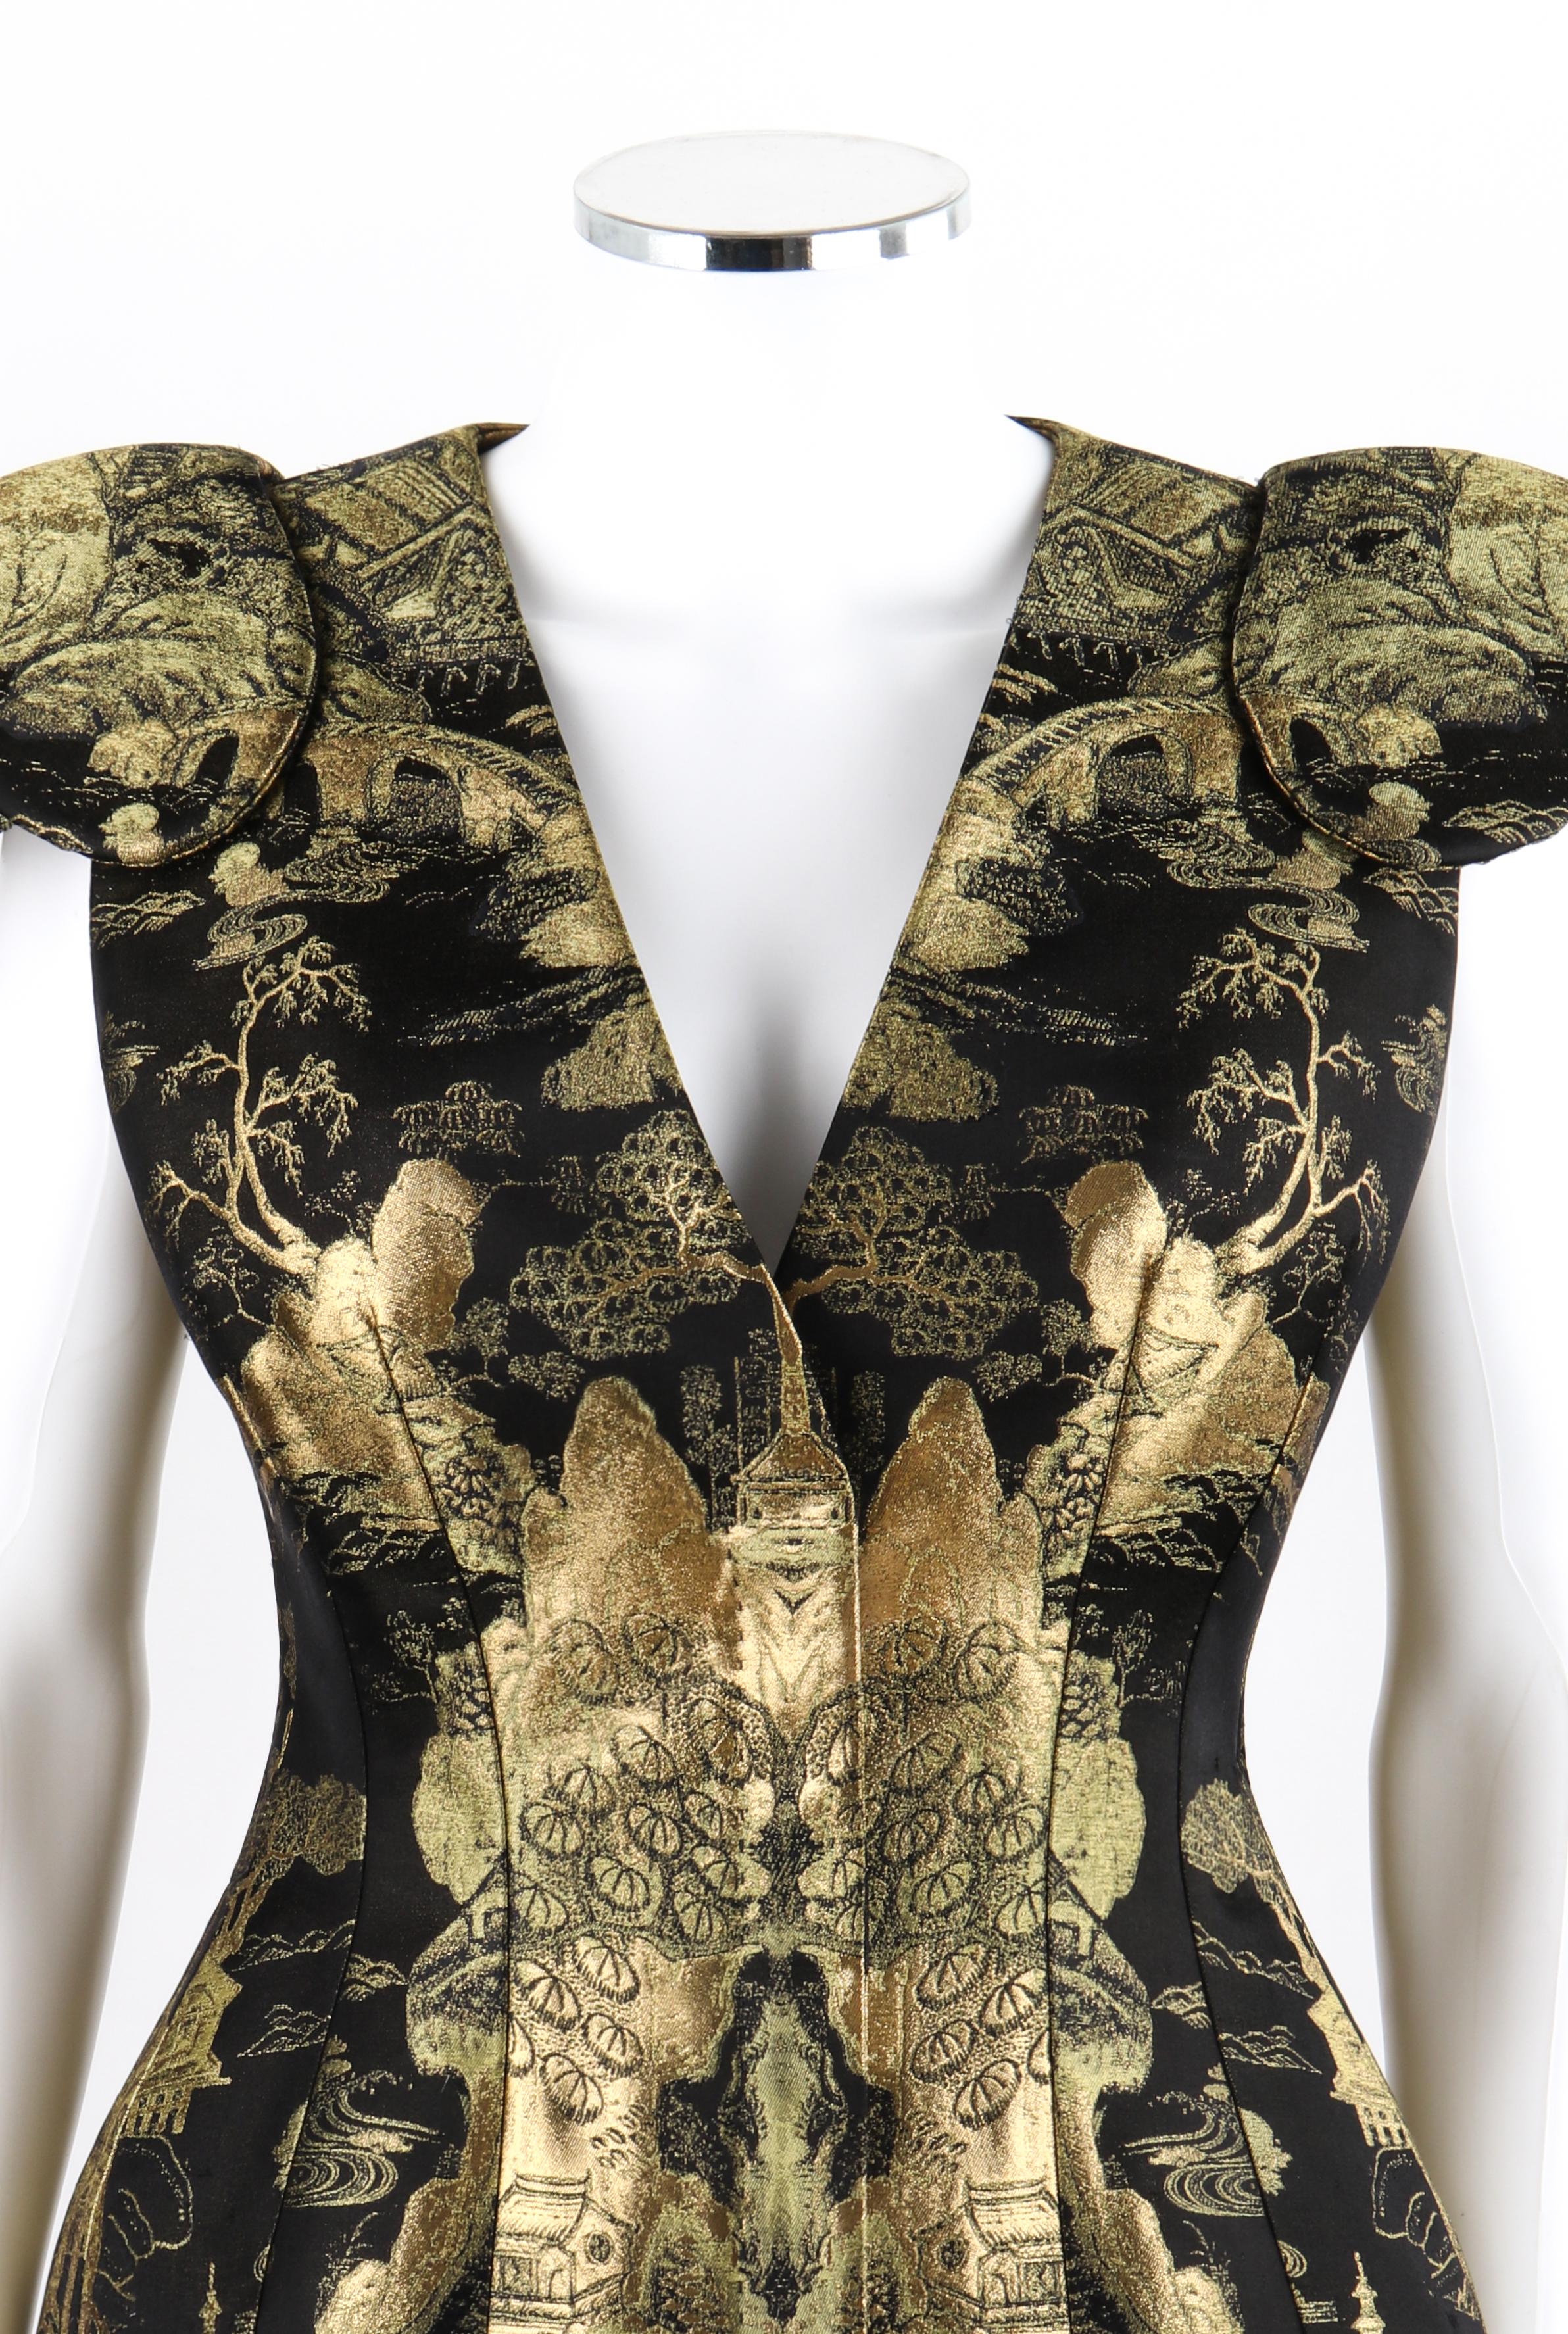 ALEXANDER McQUEEN Resort 2011 Black Gold Brocade Armour Sleeve Zip Up Jacket Top
 
Brand / Manufacturer: Alexander McQueen
Collection: Resort 2011
Designer: Sarah Burton
Style: Sleeveless jacket top
Color(s): Shades of black, gold
Lined: Yes
Marked